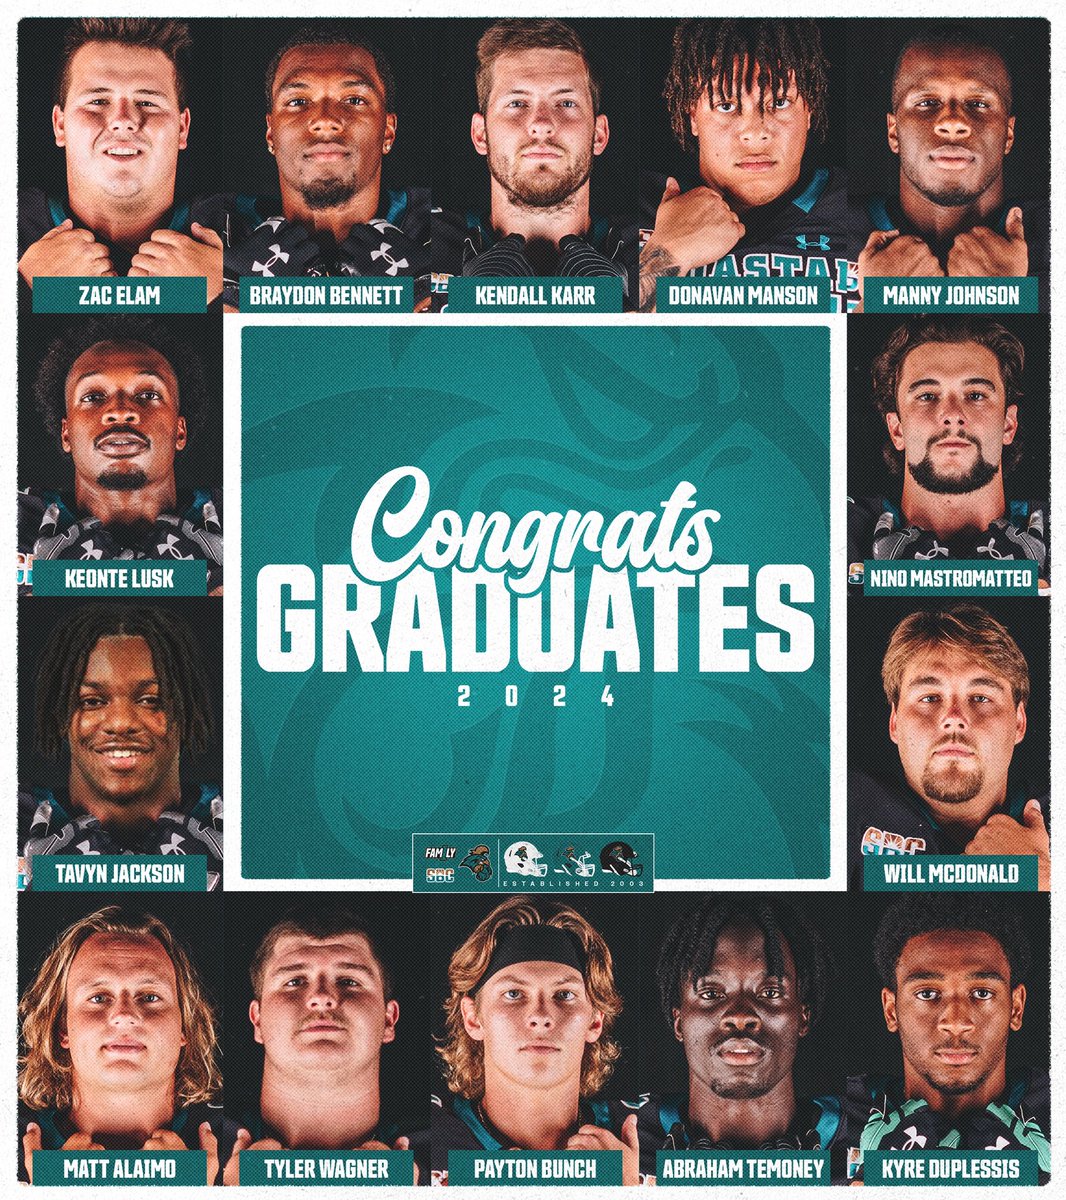 Difference makers.

Congrats to all of our graduates! Excited to see them become leaders in all areas!

#BALLATTHEBEACH | #FAM1LY | #TEALNATION